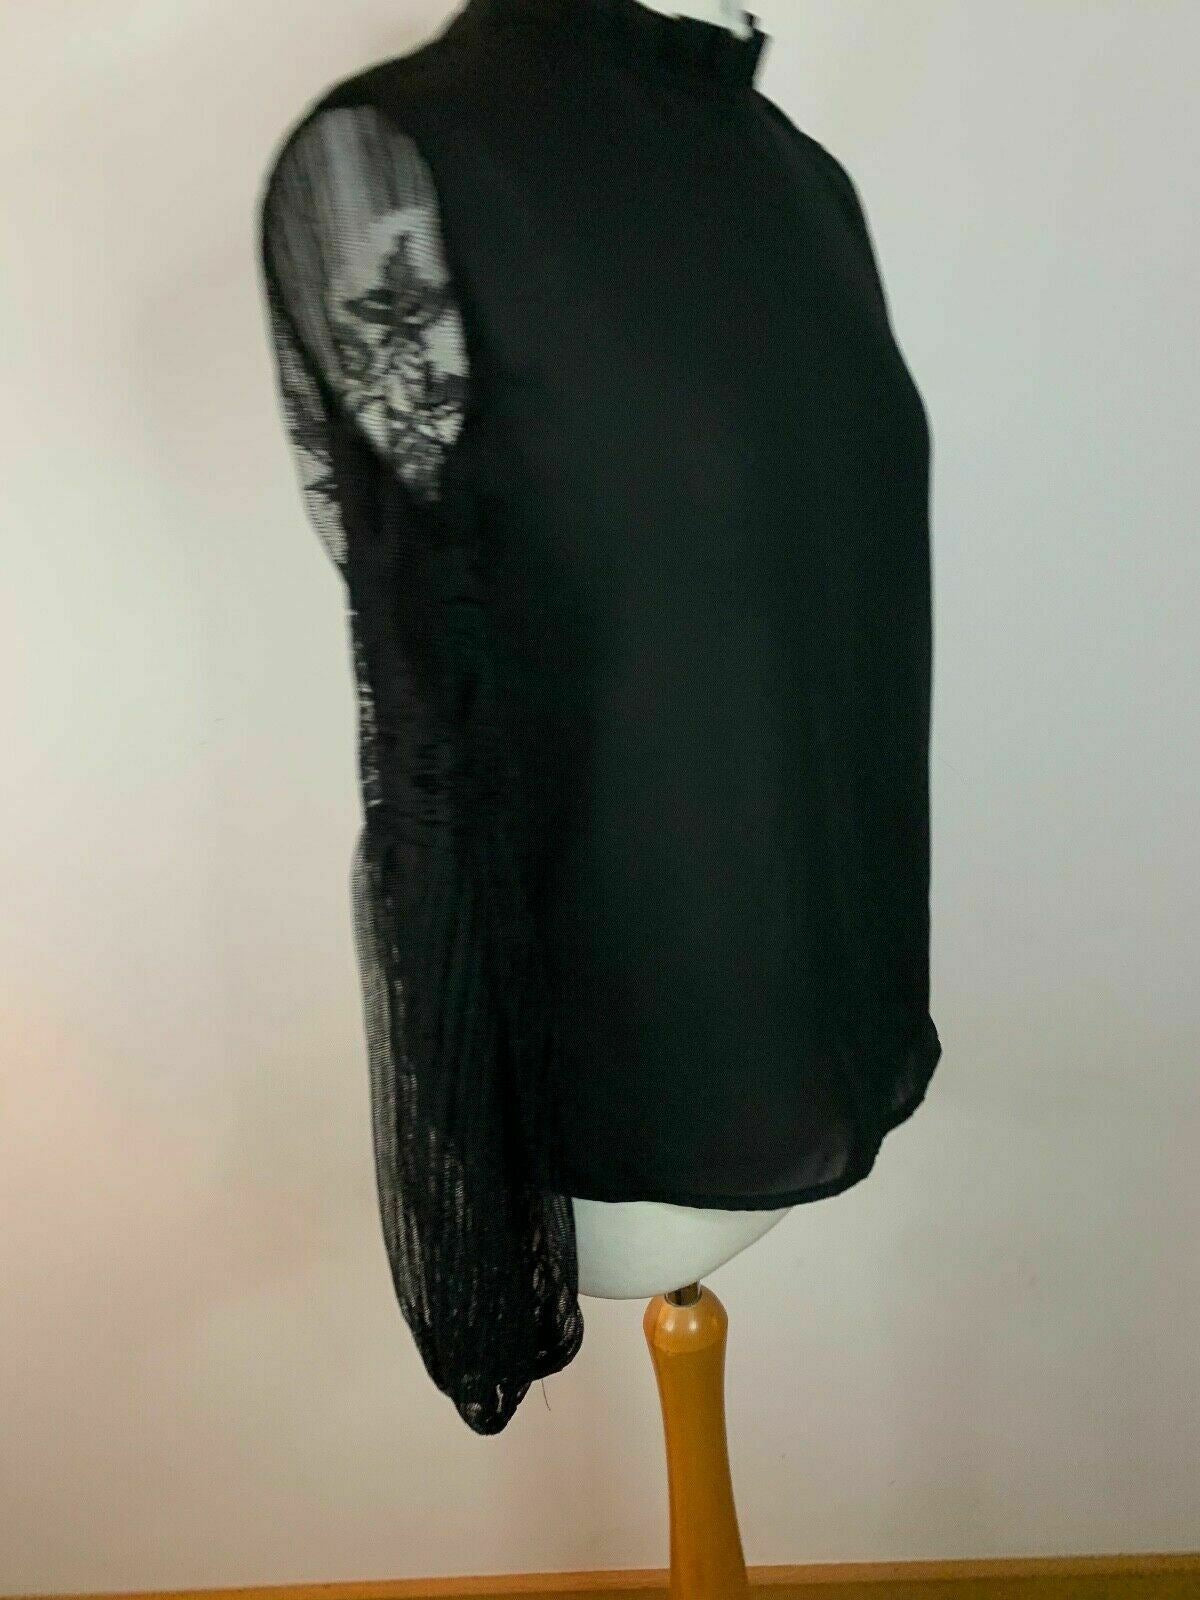 SHEIN Black Shell Top Lace Sleeve Frill Neck Size S 8 Balloon Sleeve